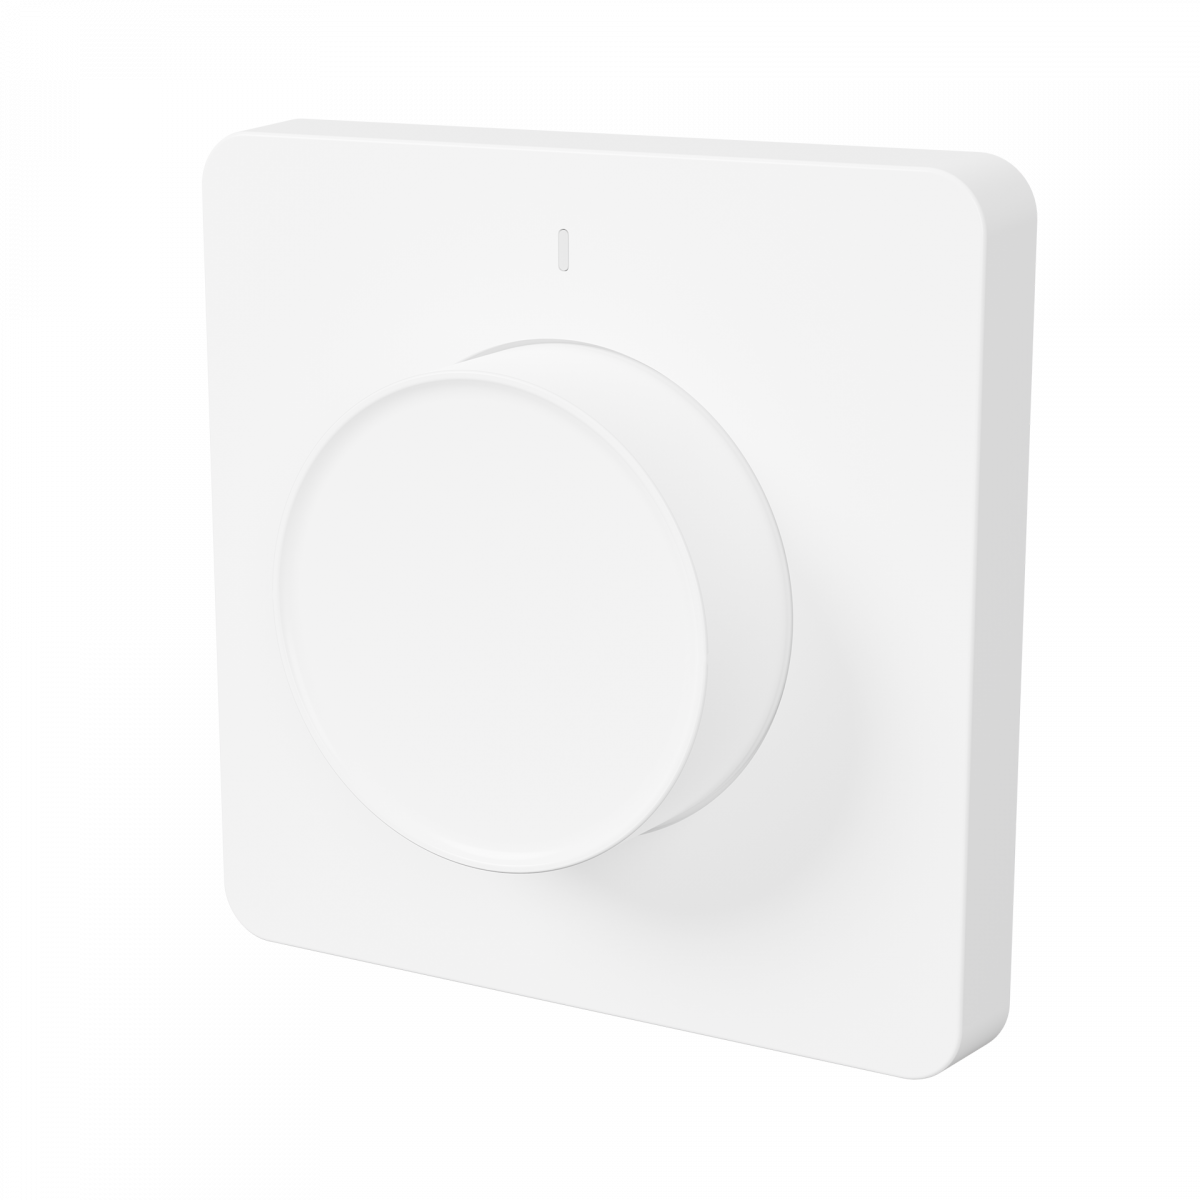 TS-Switch-Dimmer-1920x1920-04